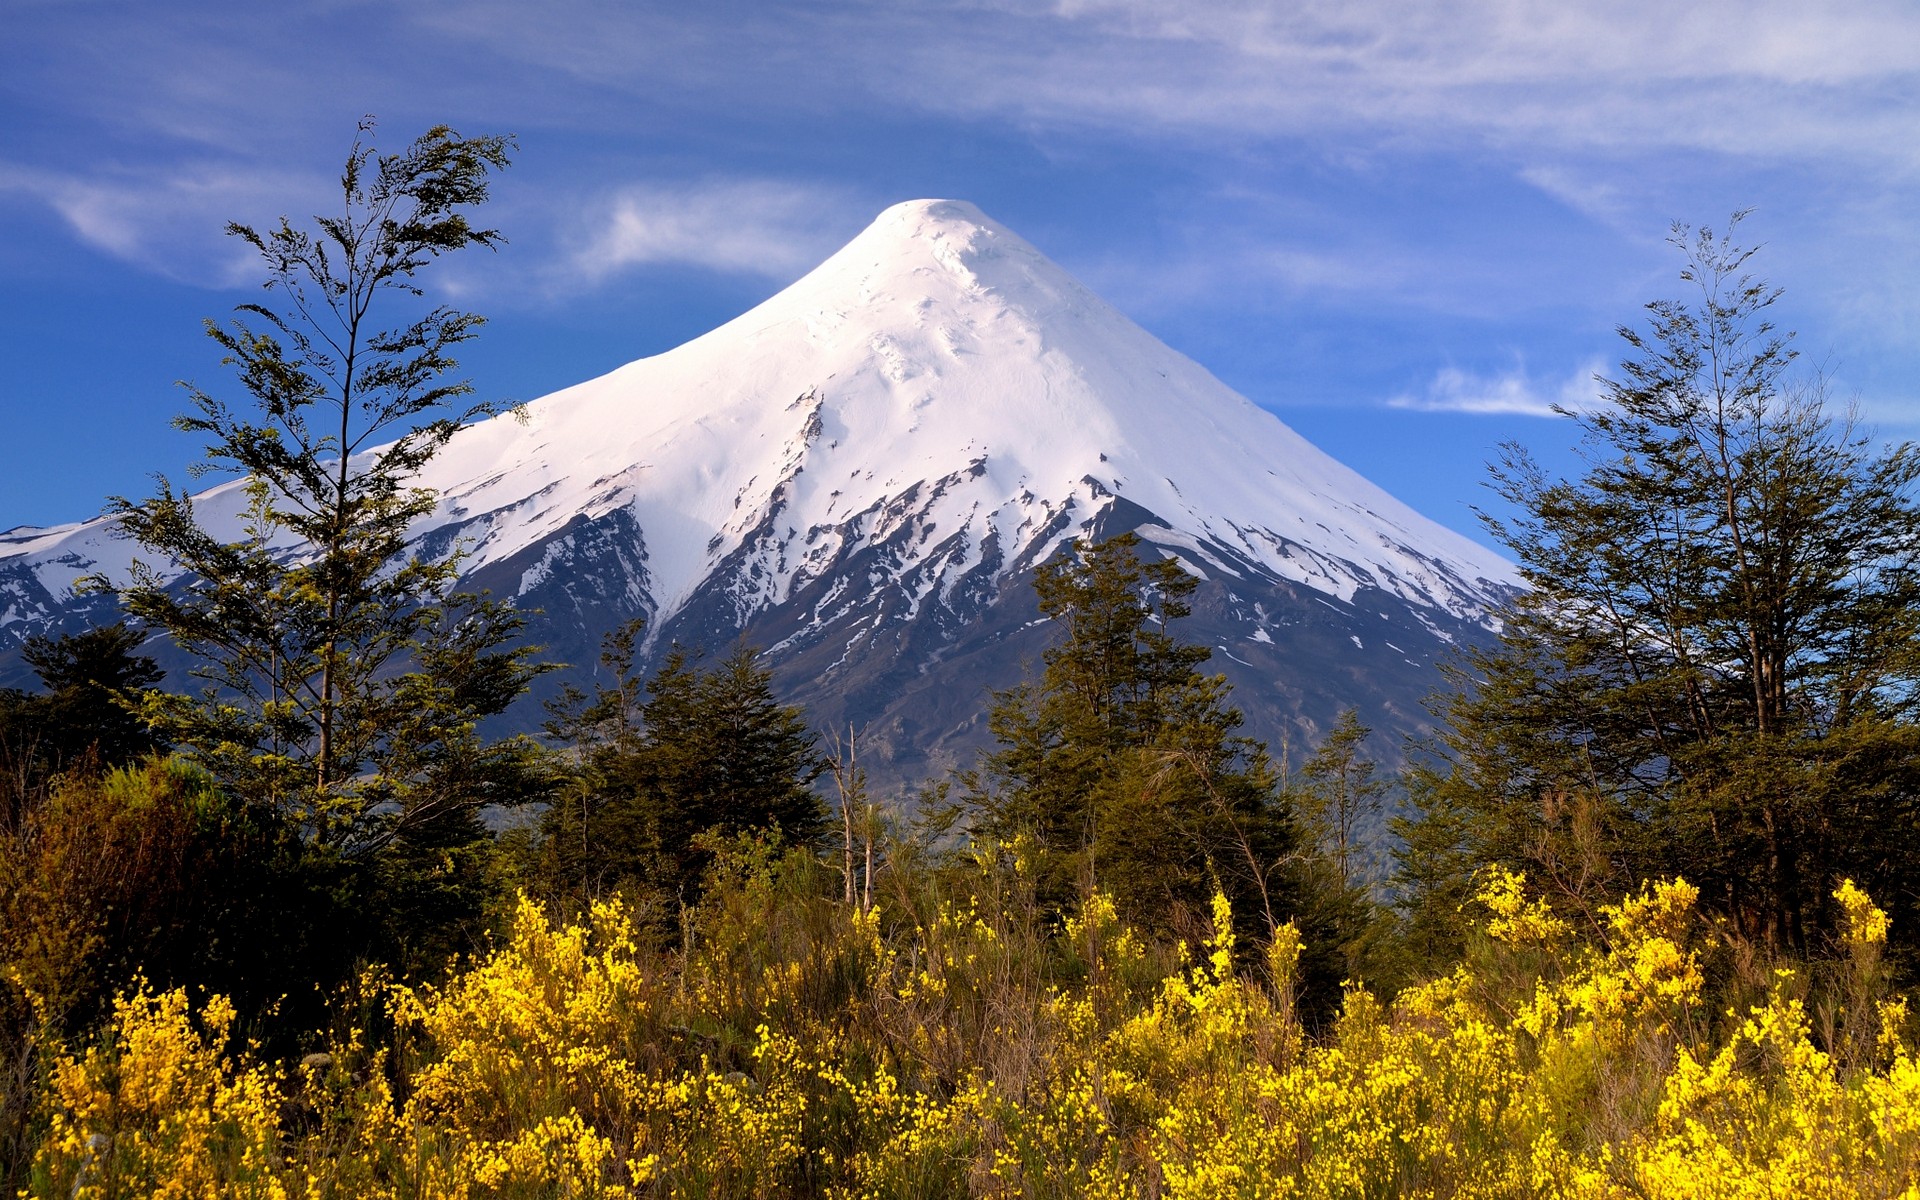 General 1920x1200 snowy peak volcano mountains Chile trees wildflowers shrubs white yellow nature landscape snowy mountain South America